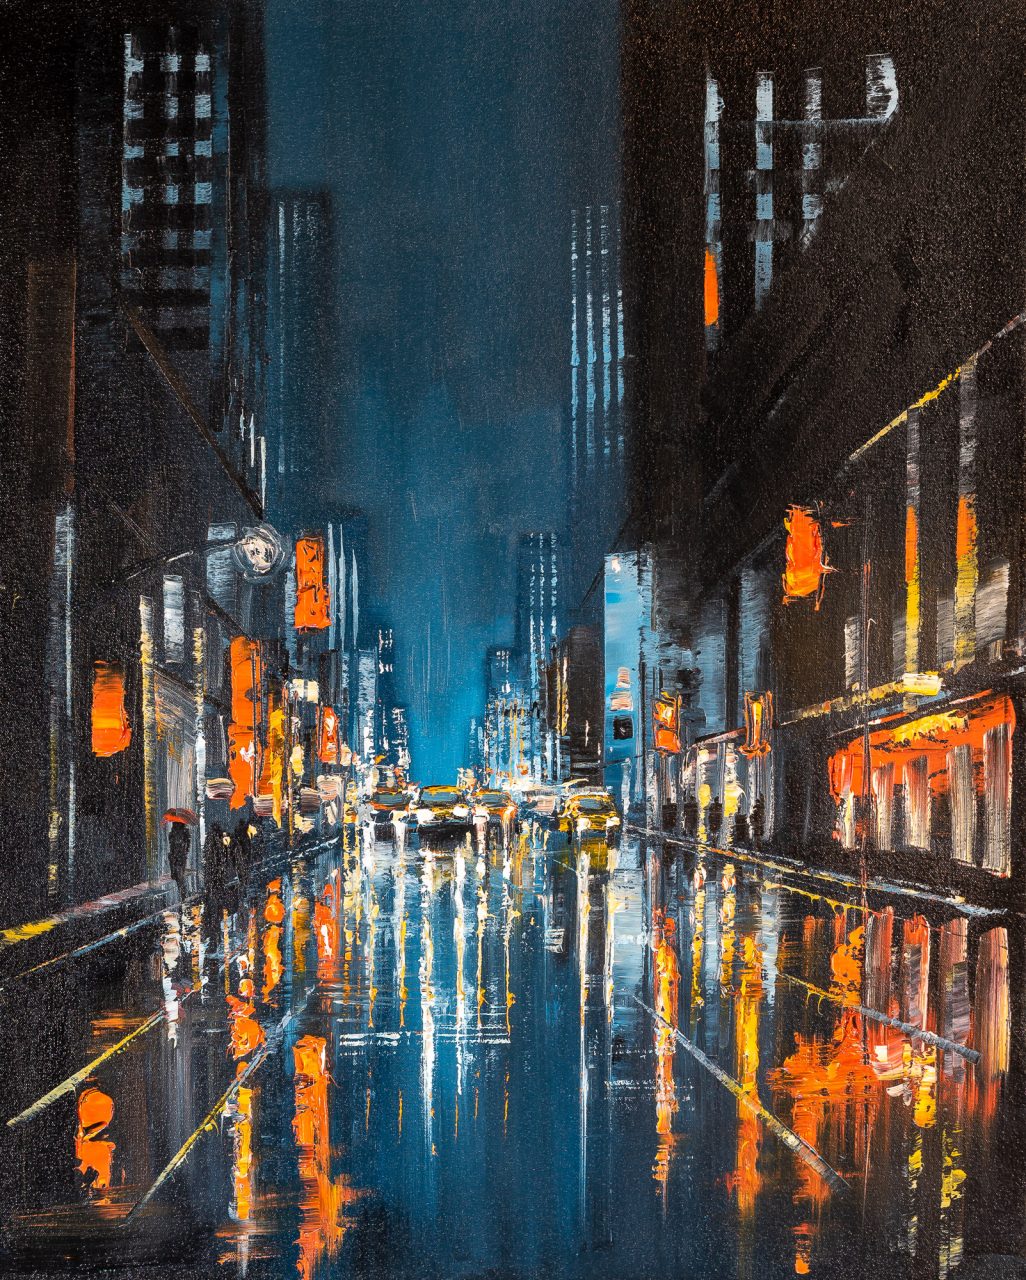 Light Up The Dark by Paul Kenton, UK contemporary cityscape artist, an original painting from his New York Collection